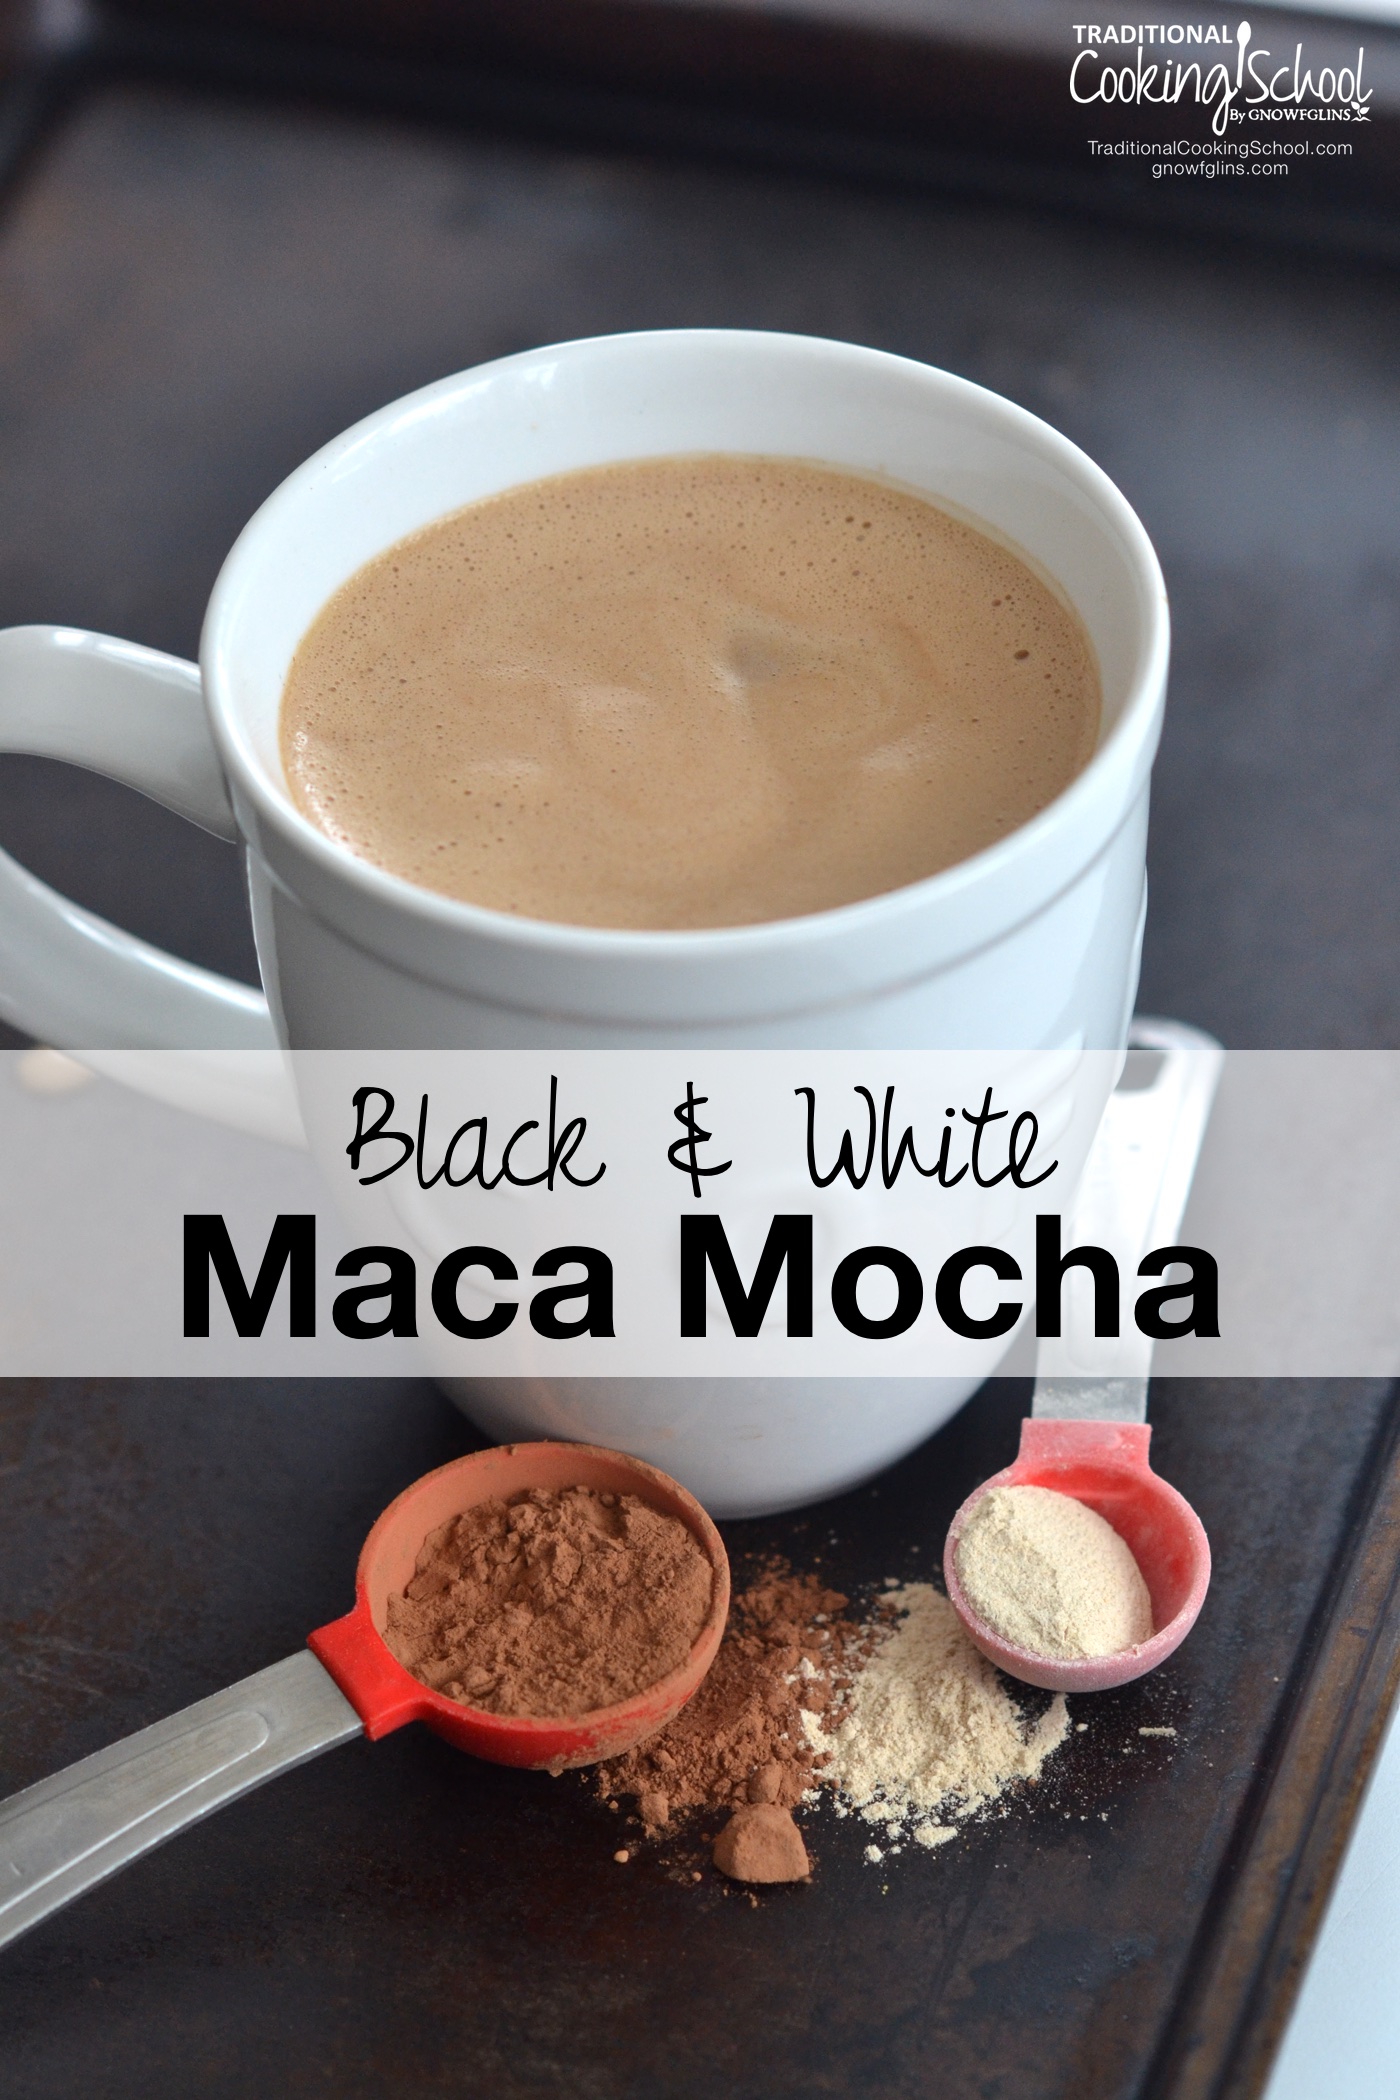 30 Maca Recipes {so you can get your superfood on!} | We all get the feeling like we just need to re-charge our batteries and have more energy. One Peruvian plant root in particular may just make you feel like your batteries are finally charged. Consider this adaptogenic superfood as an amazing addition to your lifestyle -- one that might be the missing link if you experience low energy levels, depression, compromised immunity, or hormonal imbalances. By the time you're done wiping the drool off your mouth from looking at these 30 maca recipes, believe me, you're going to want to get your superfood on! | TraditionalCookingSchool.com